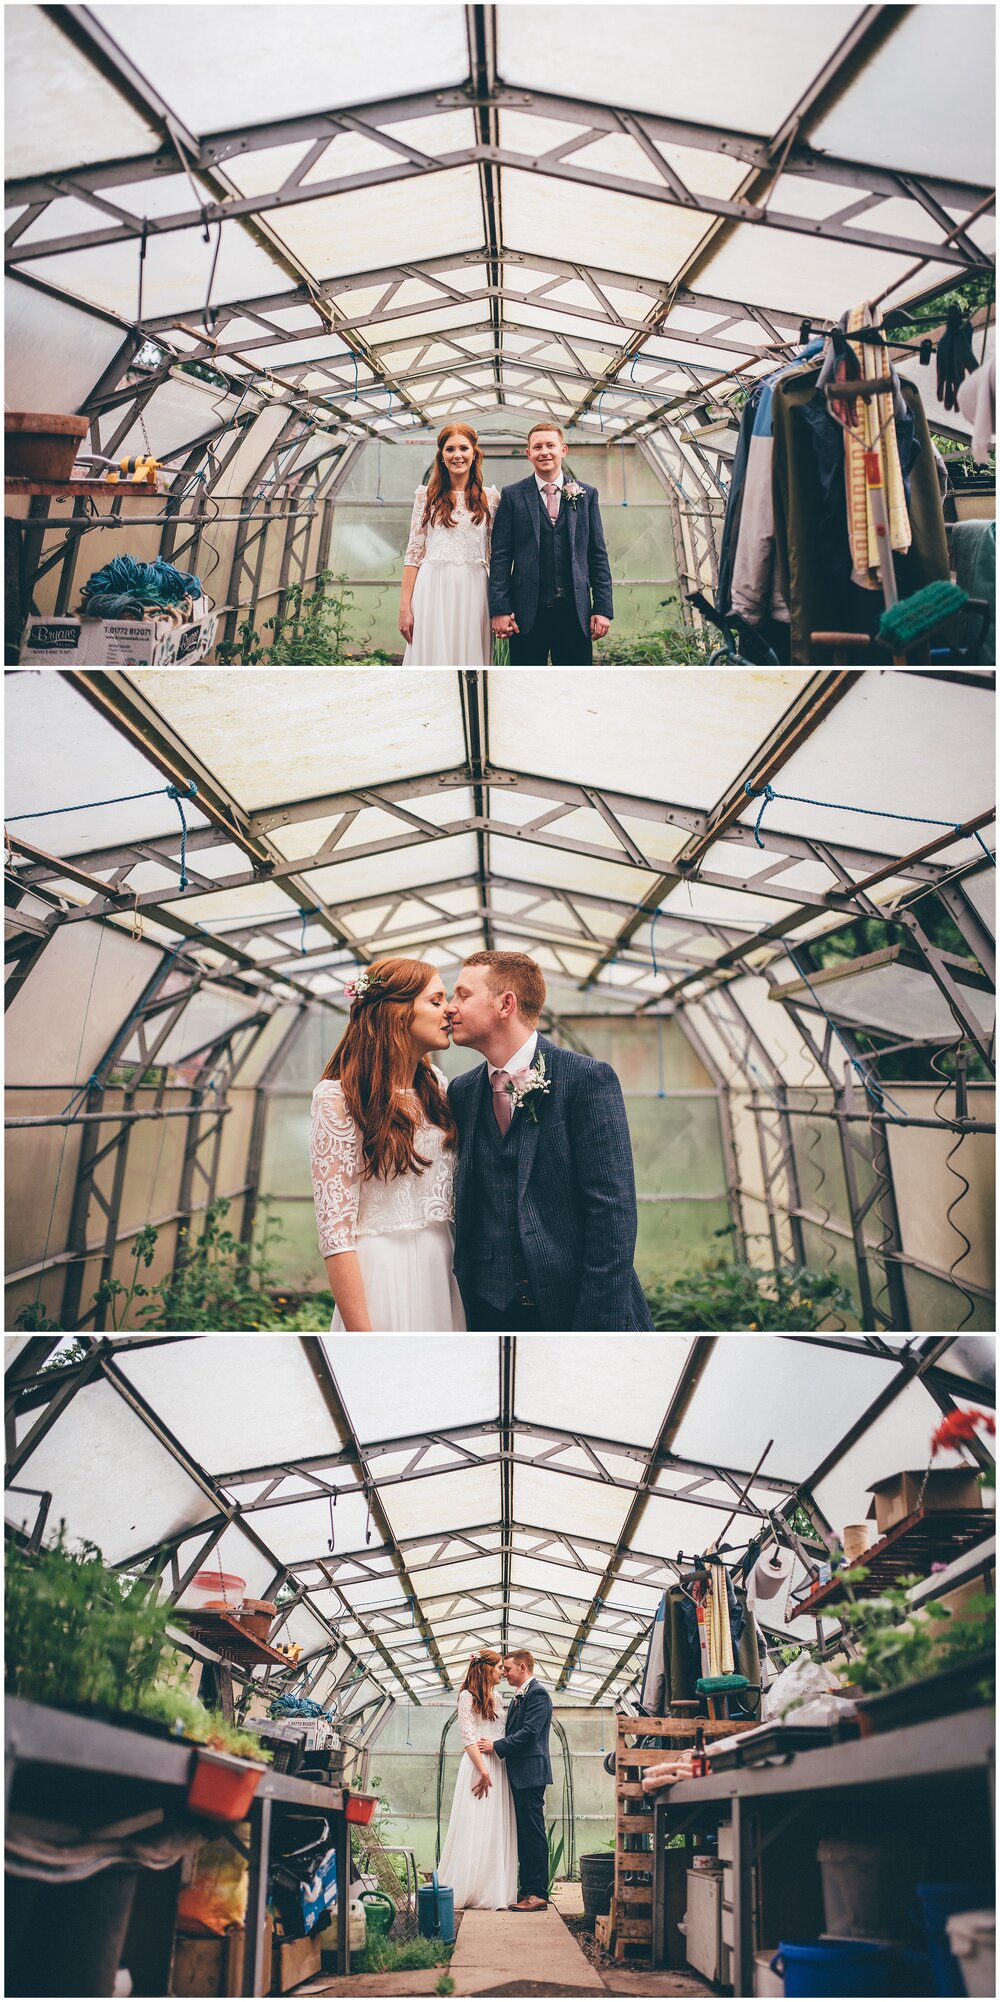 Bride and groom have their wedding photographs taken in a greenhouse at their Cheshire wedding venue.